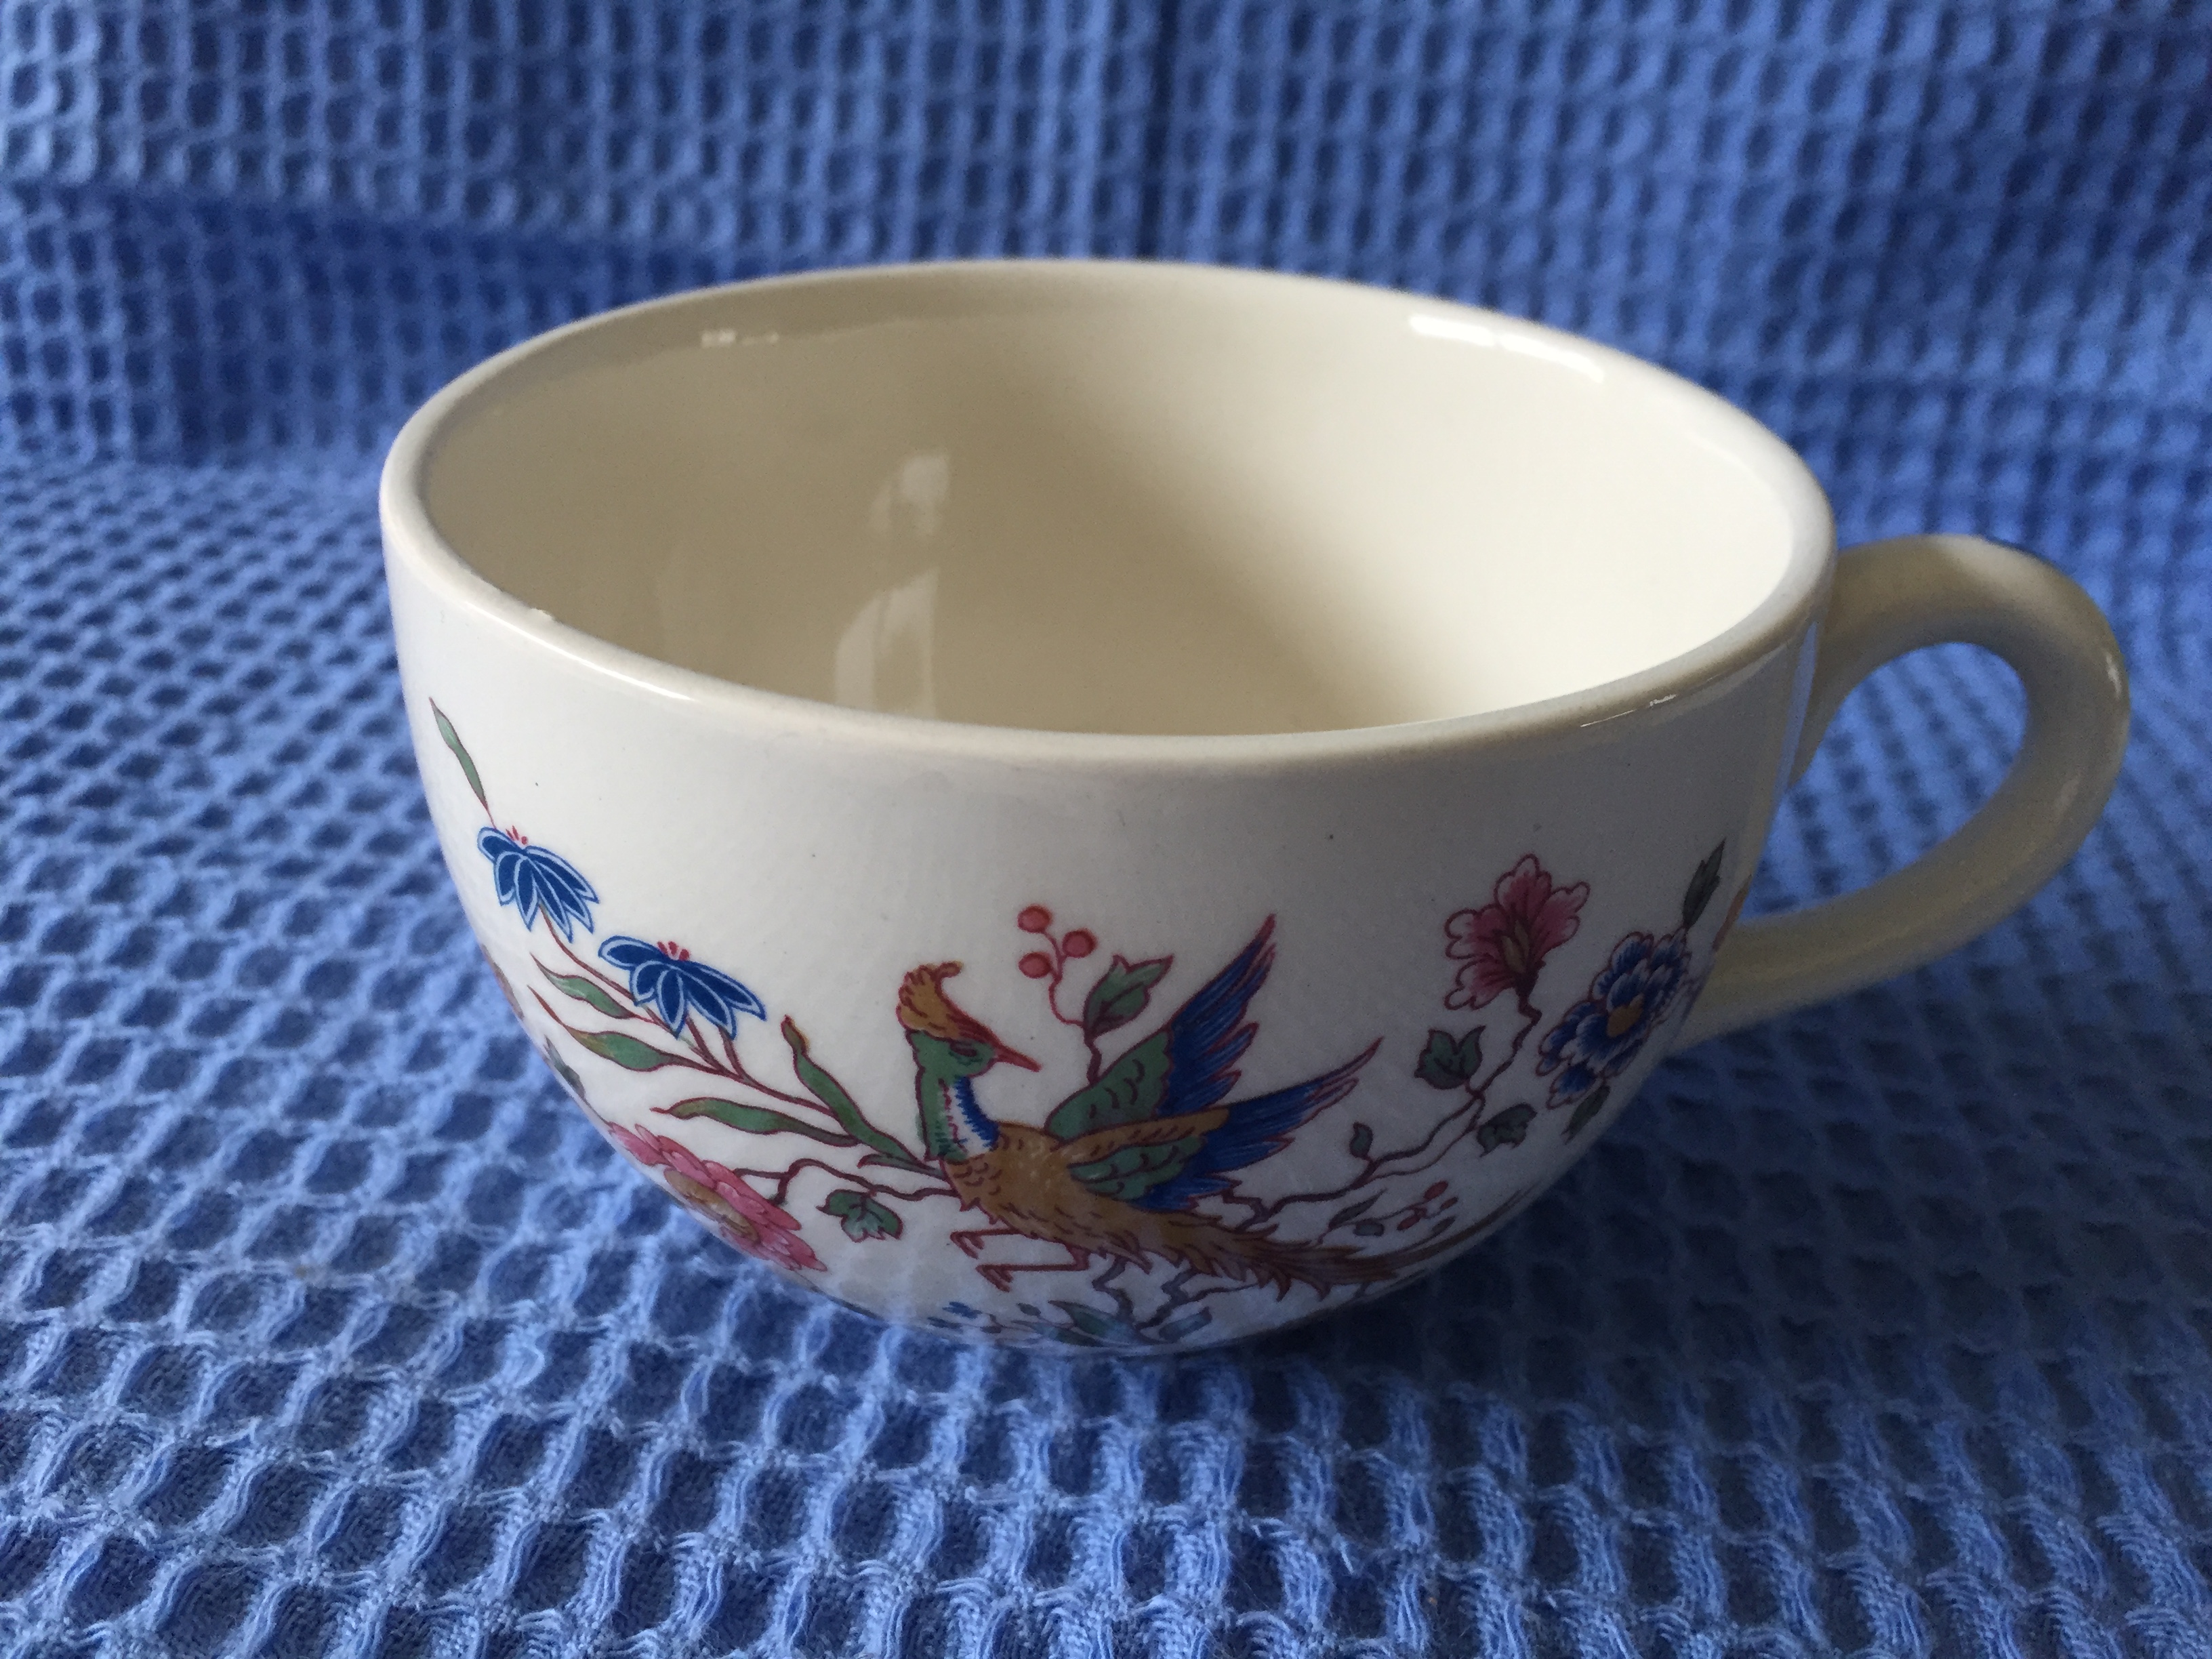 ORIGINAL BIRD OF PARADISE DESIGN CUP FROM THE FURNESS LINE SHIPPING COMPANY